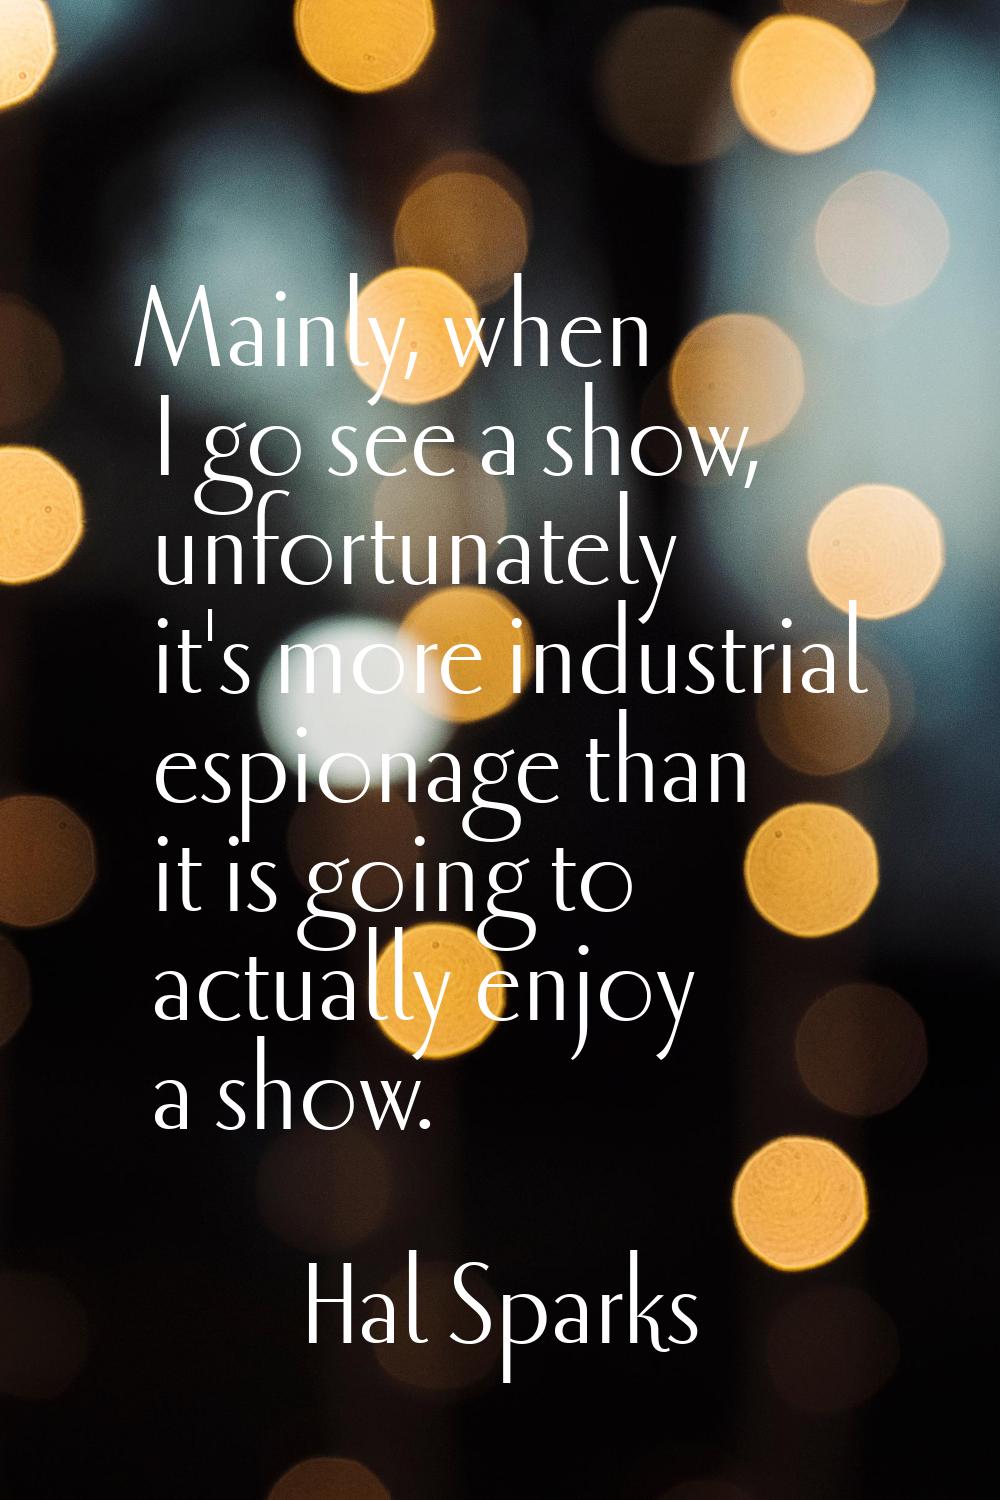 Mainly, when I go see a show, unfortunately it's more industrial espionage than it is going to actu